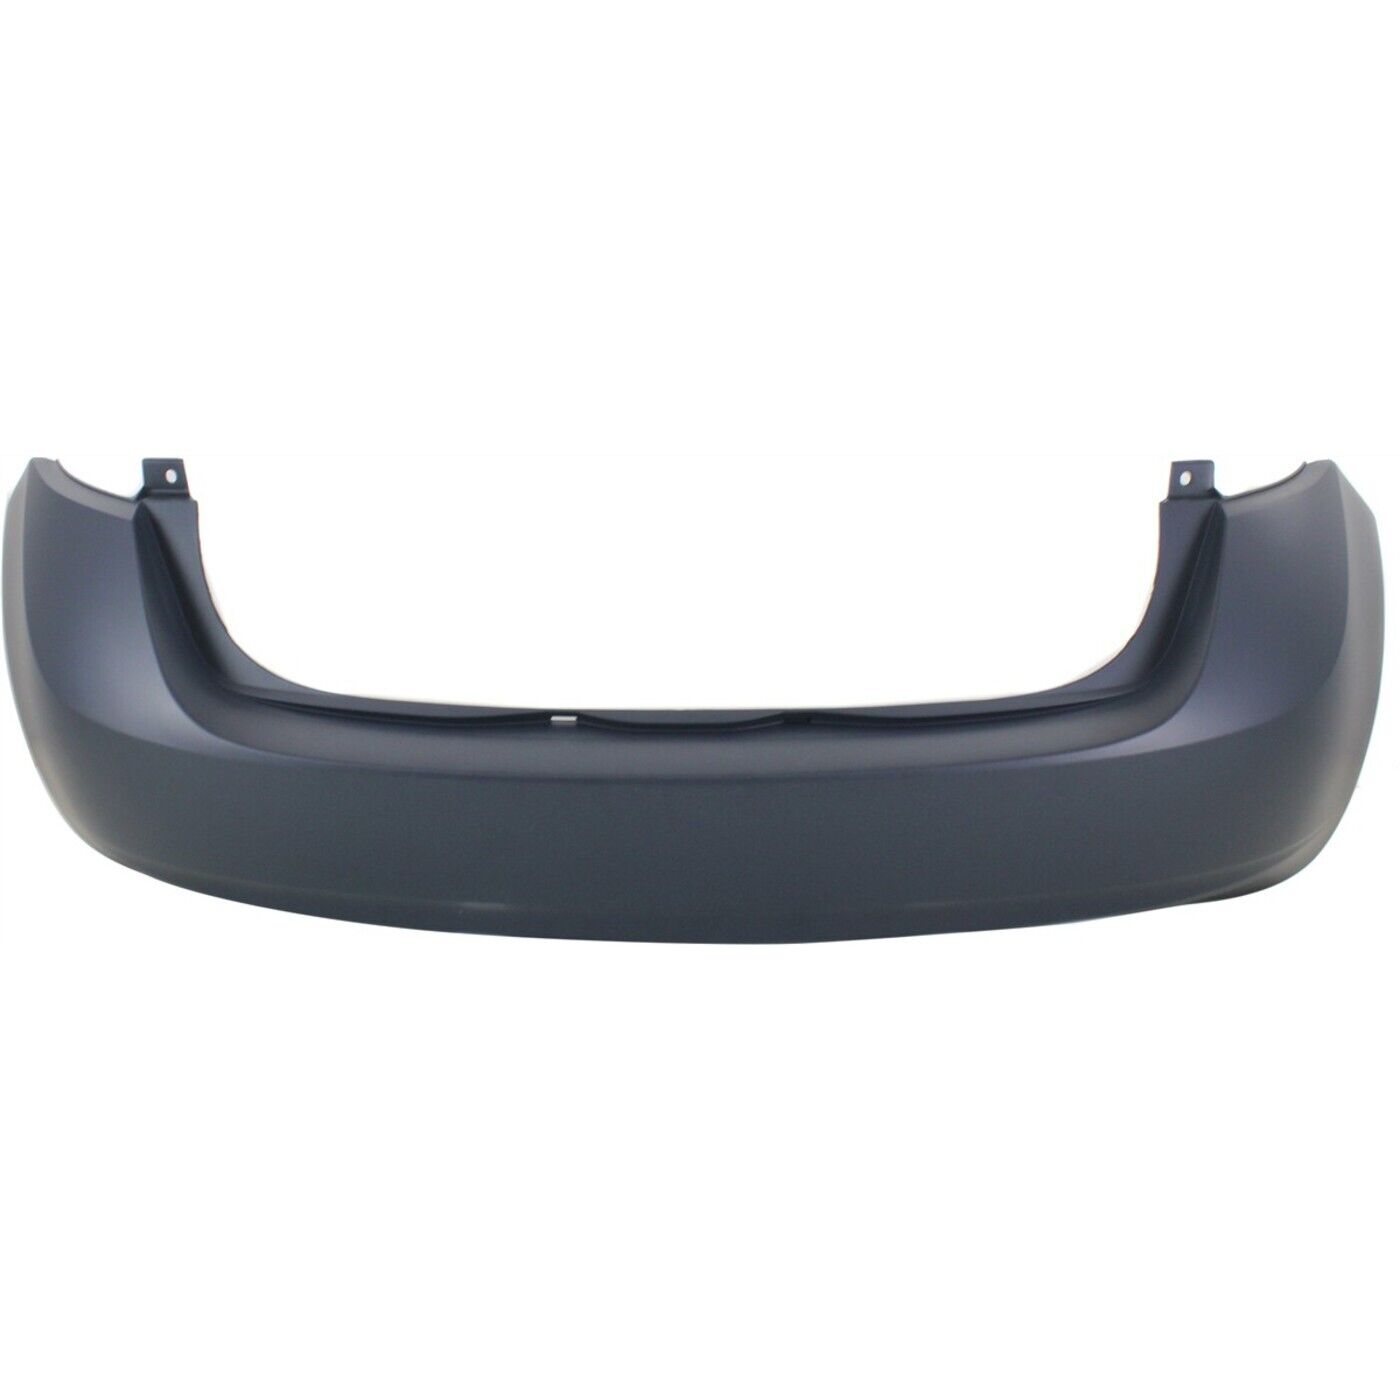 Rear Bumper Cover For 2014-2015 Nissan Versa Note Primed